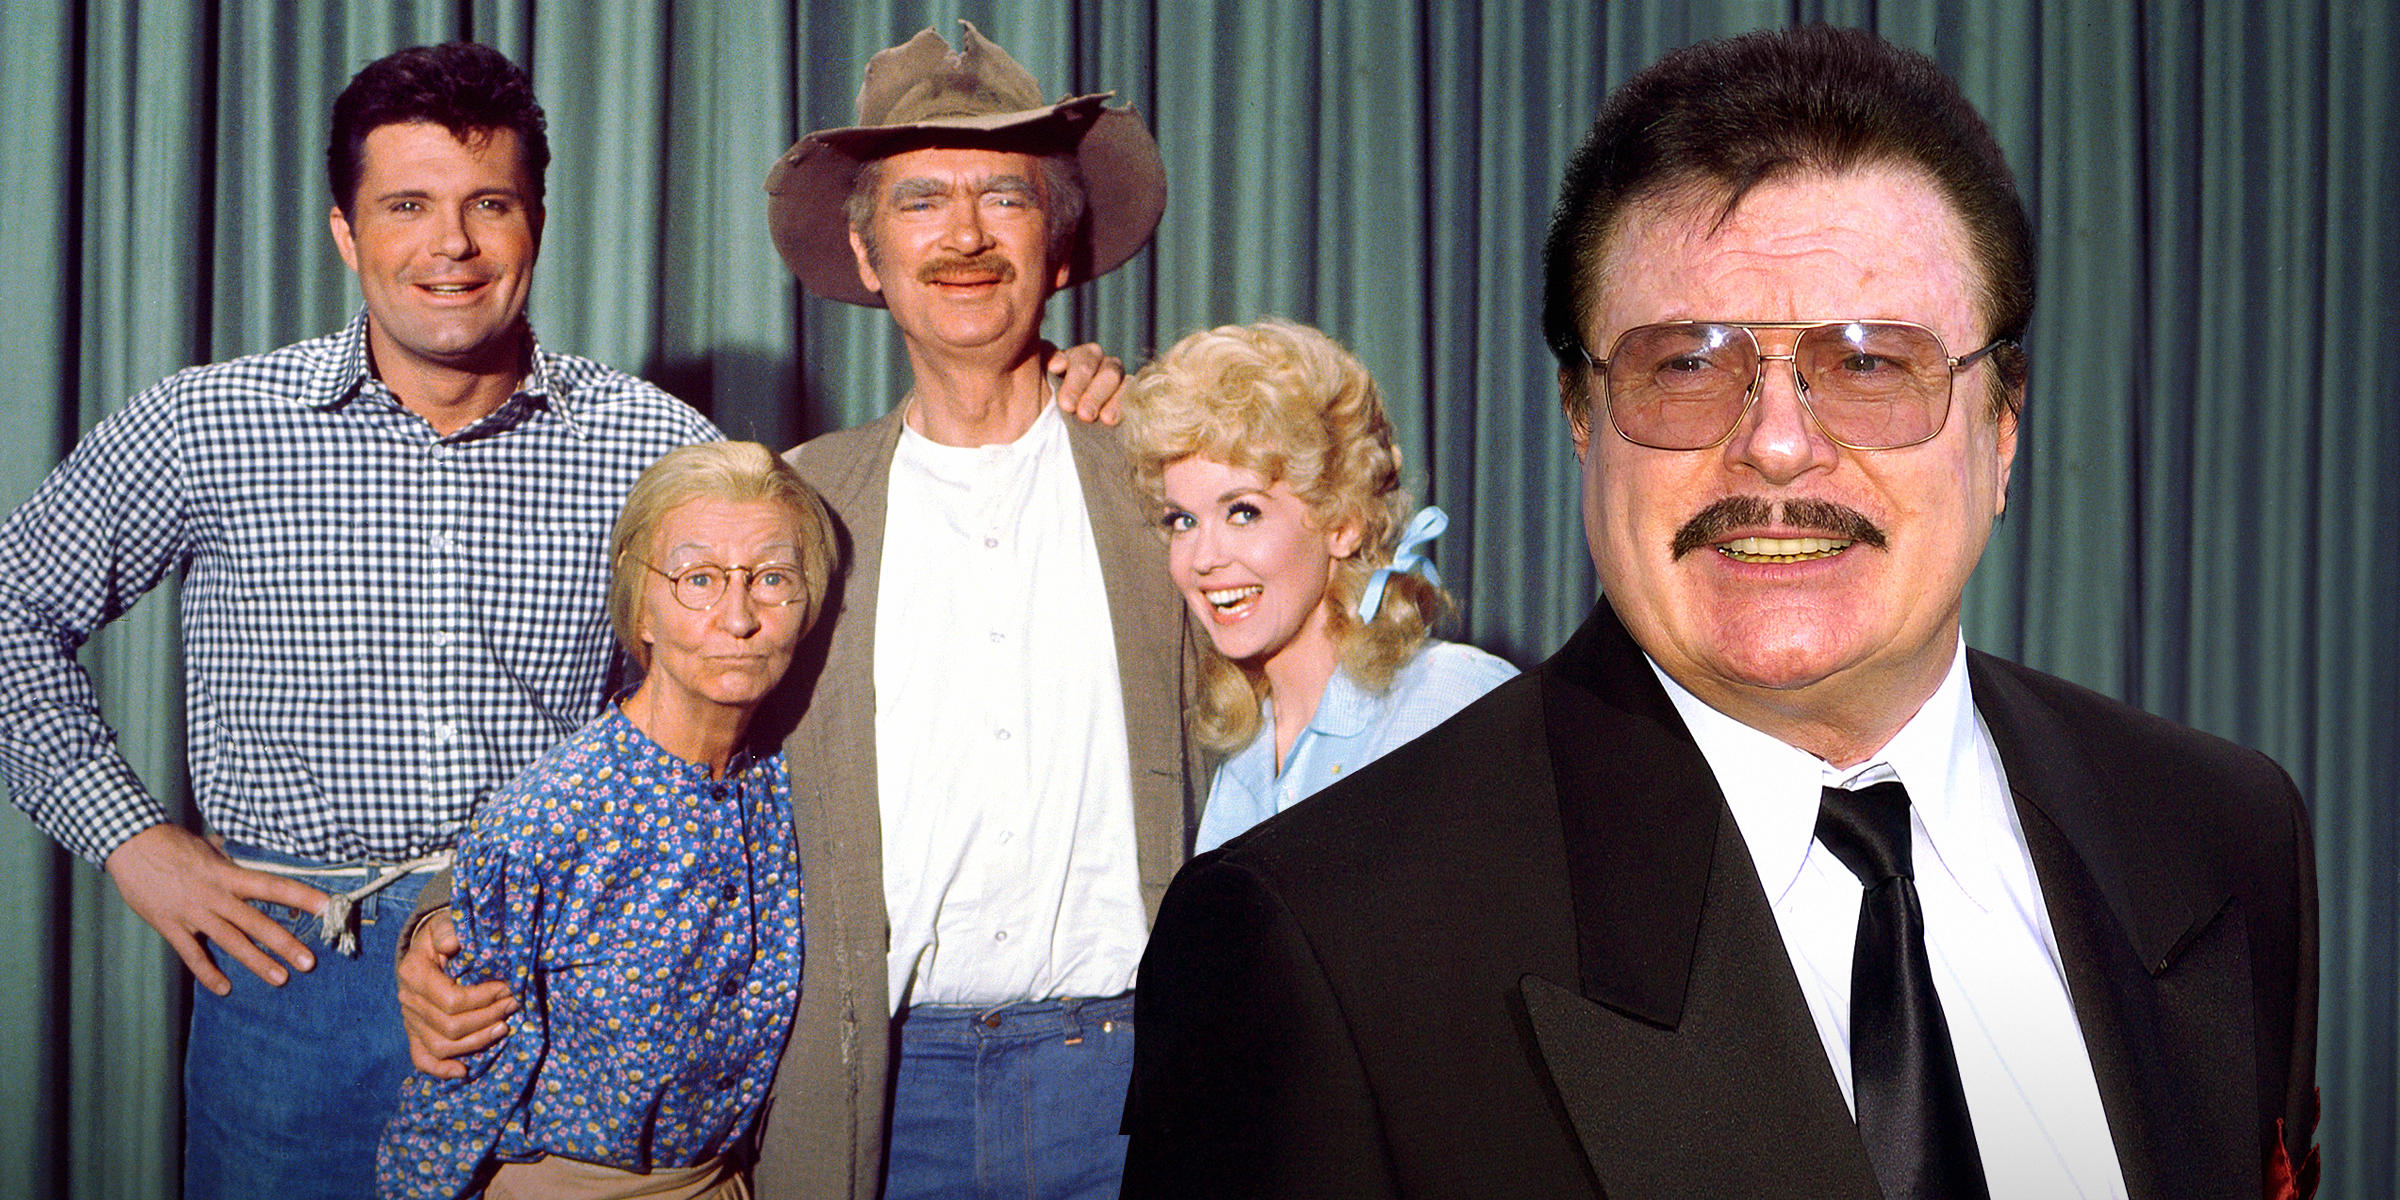 Max Baer Jr. with the cast of "The Beverly Hillbillies" | Source: Getty Images